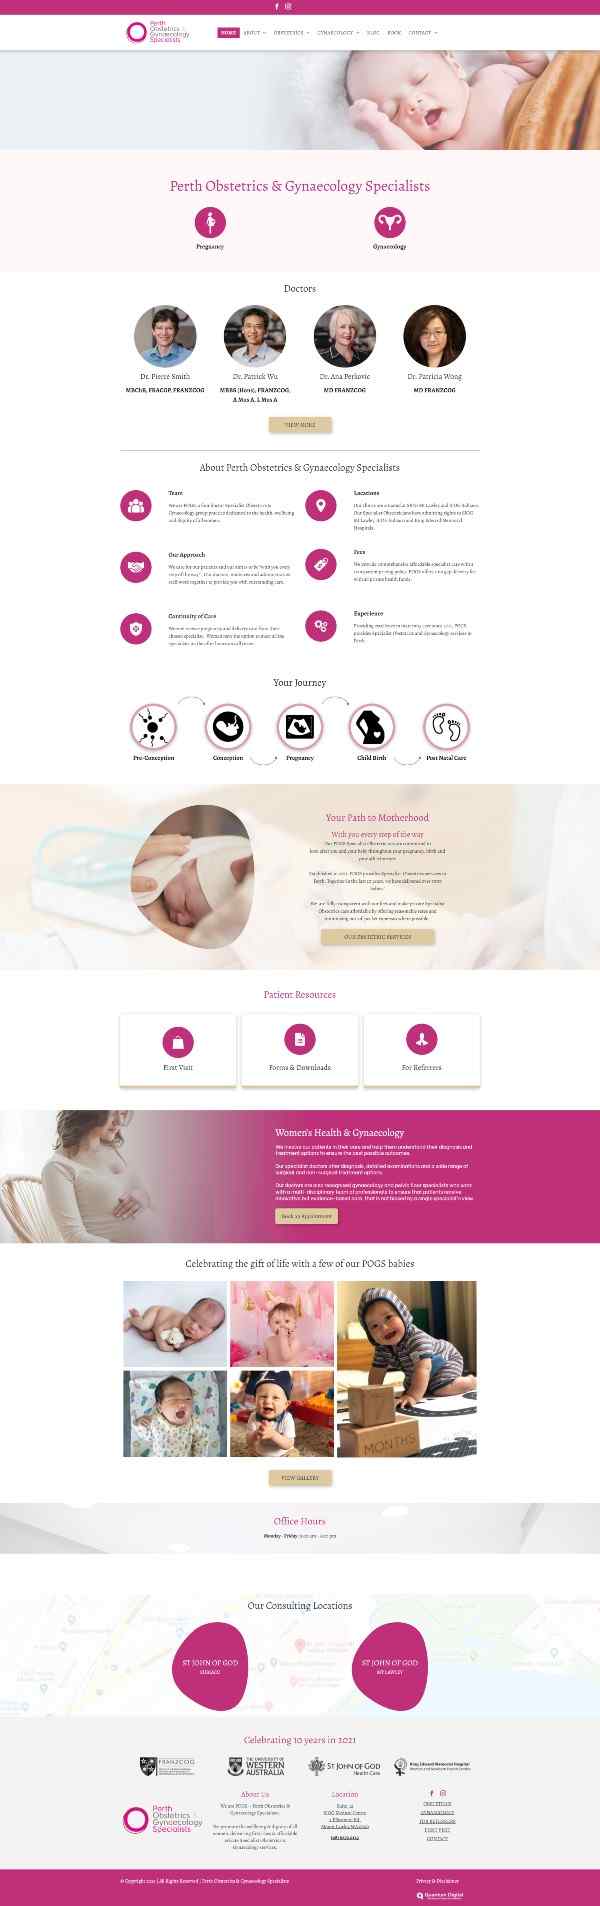 About Perth Obstetrics & Gynaecology Specialists